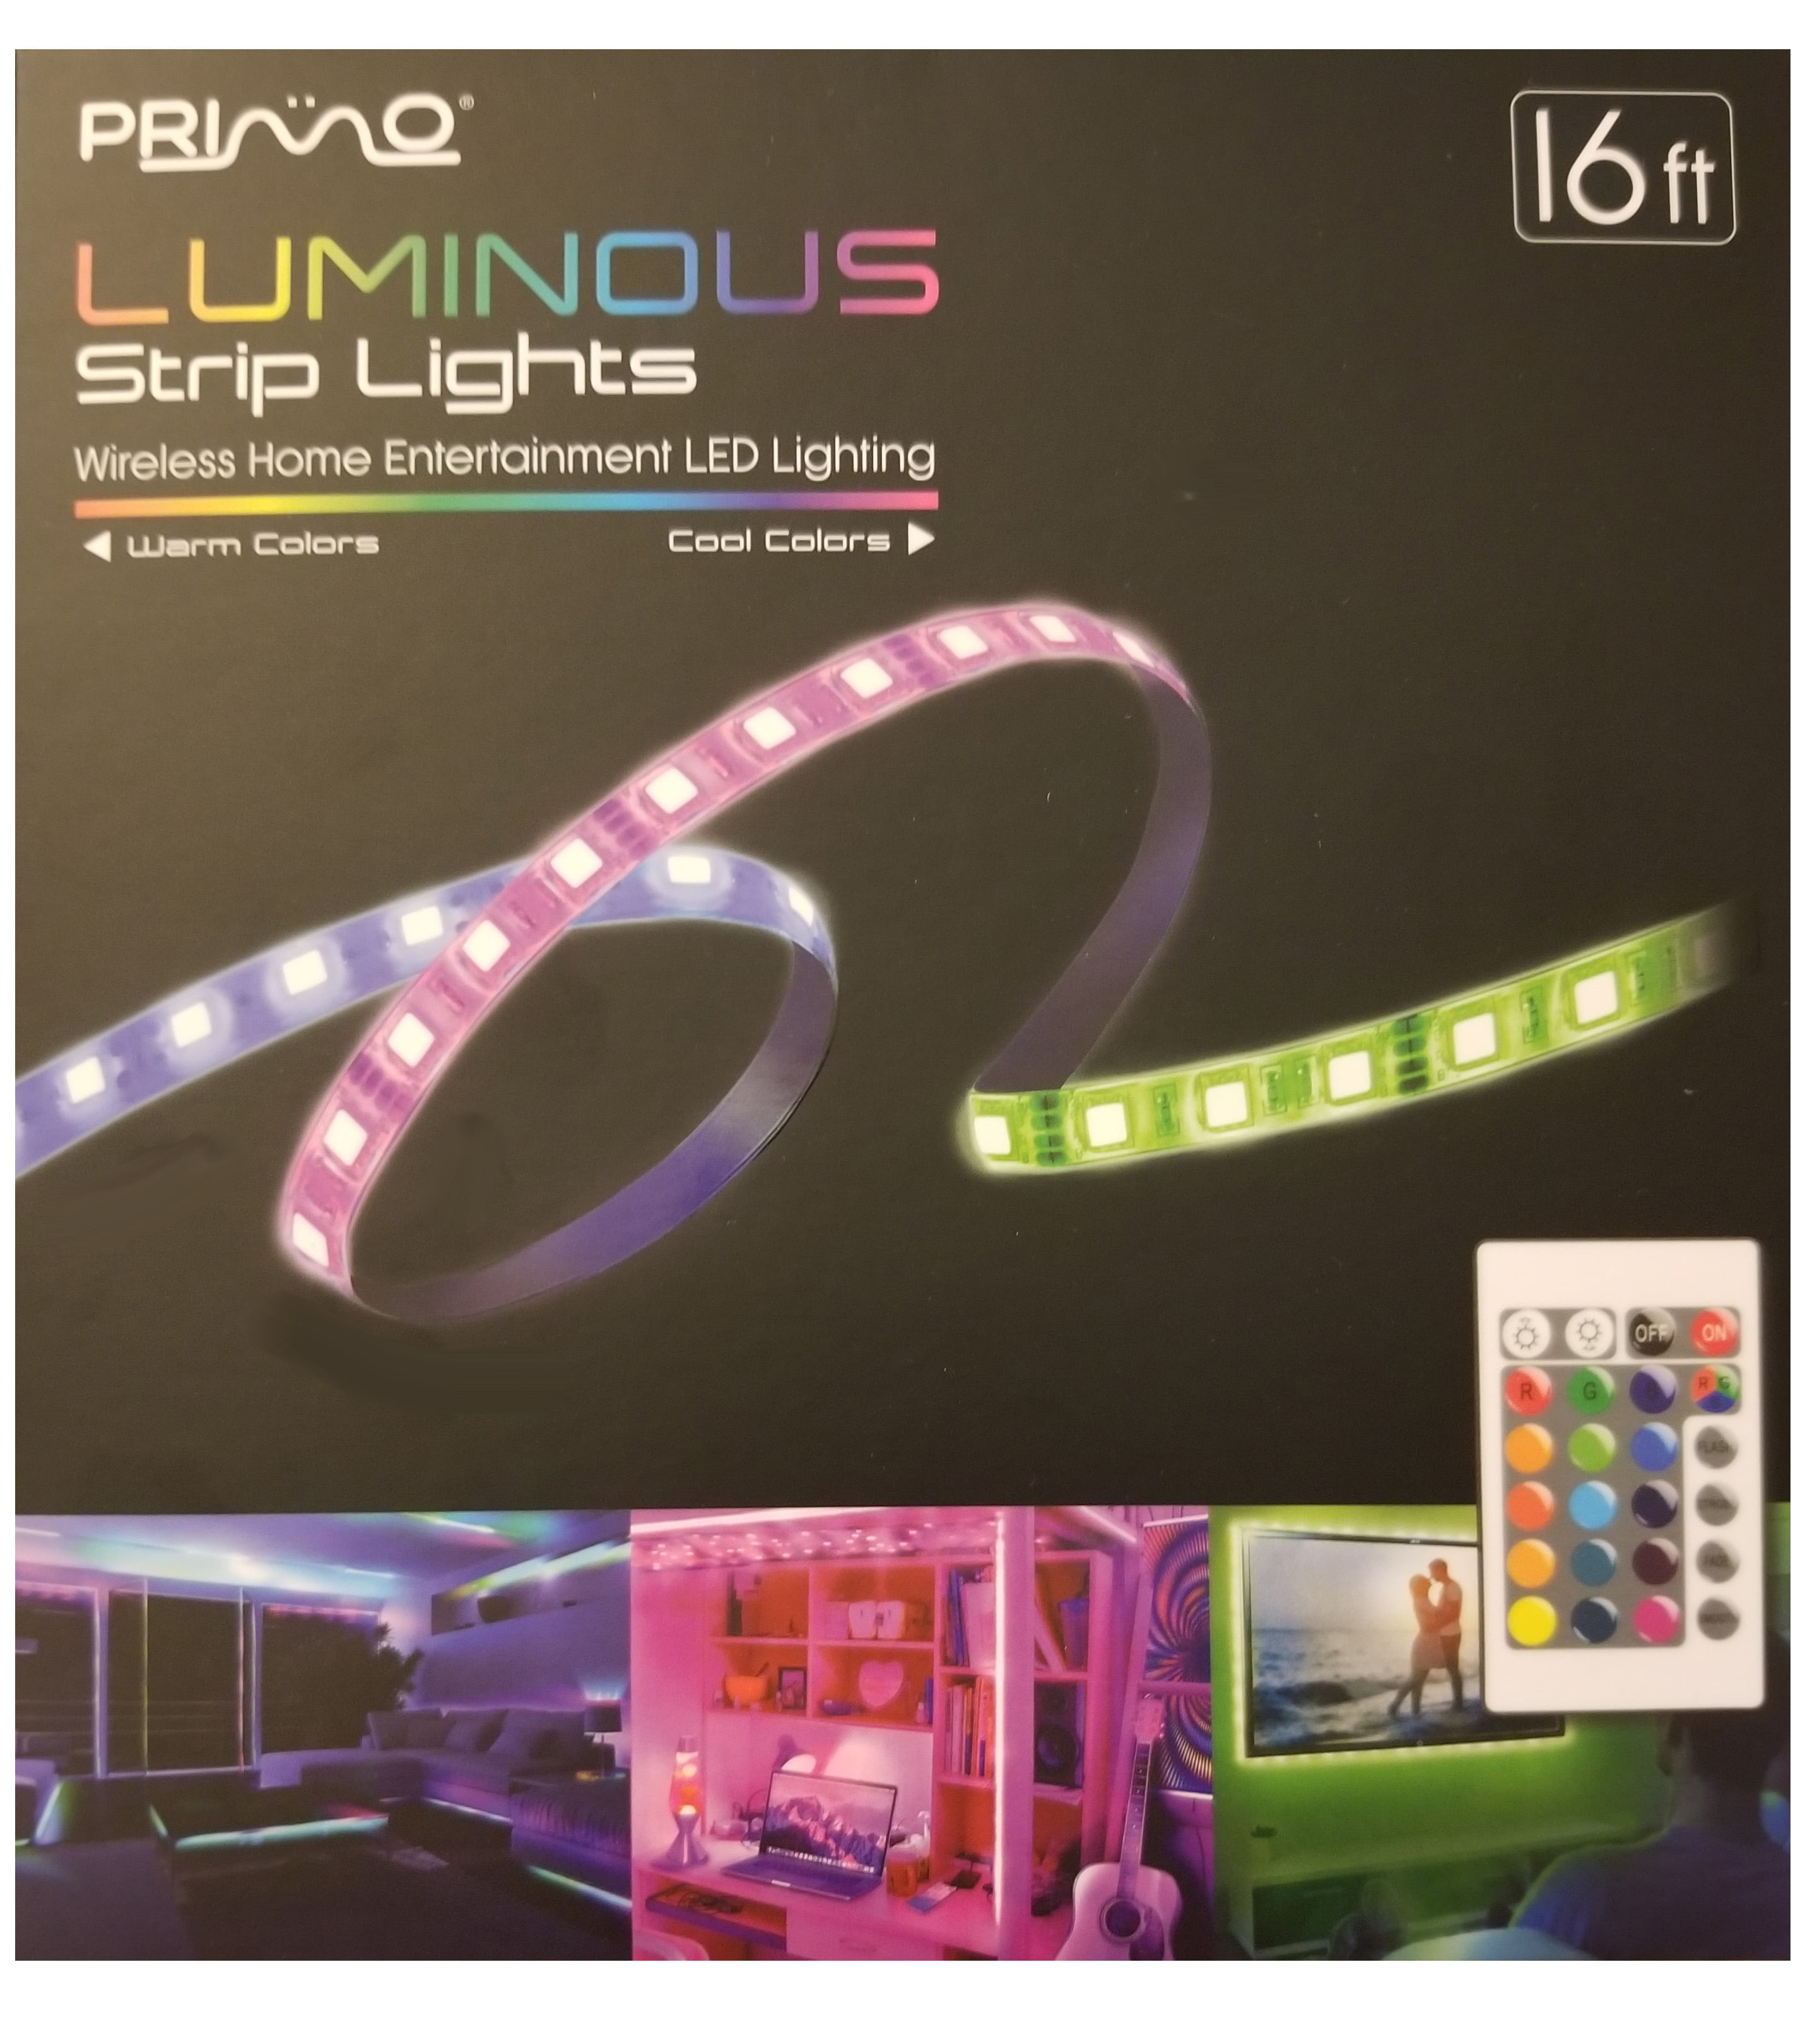 LED Luminous Strip Lights - Wireless Remote Controlled Ambient Mood Lighting for Automobile and Home Entertainment - 16ft - Walmart.com